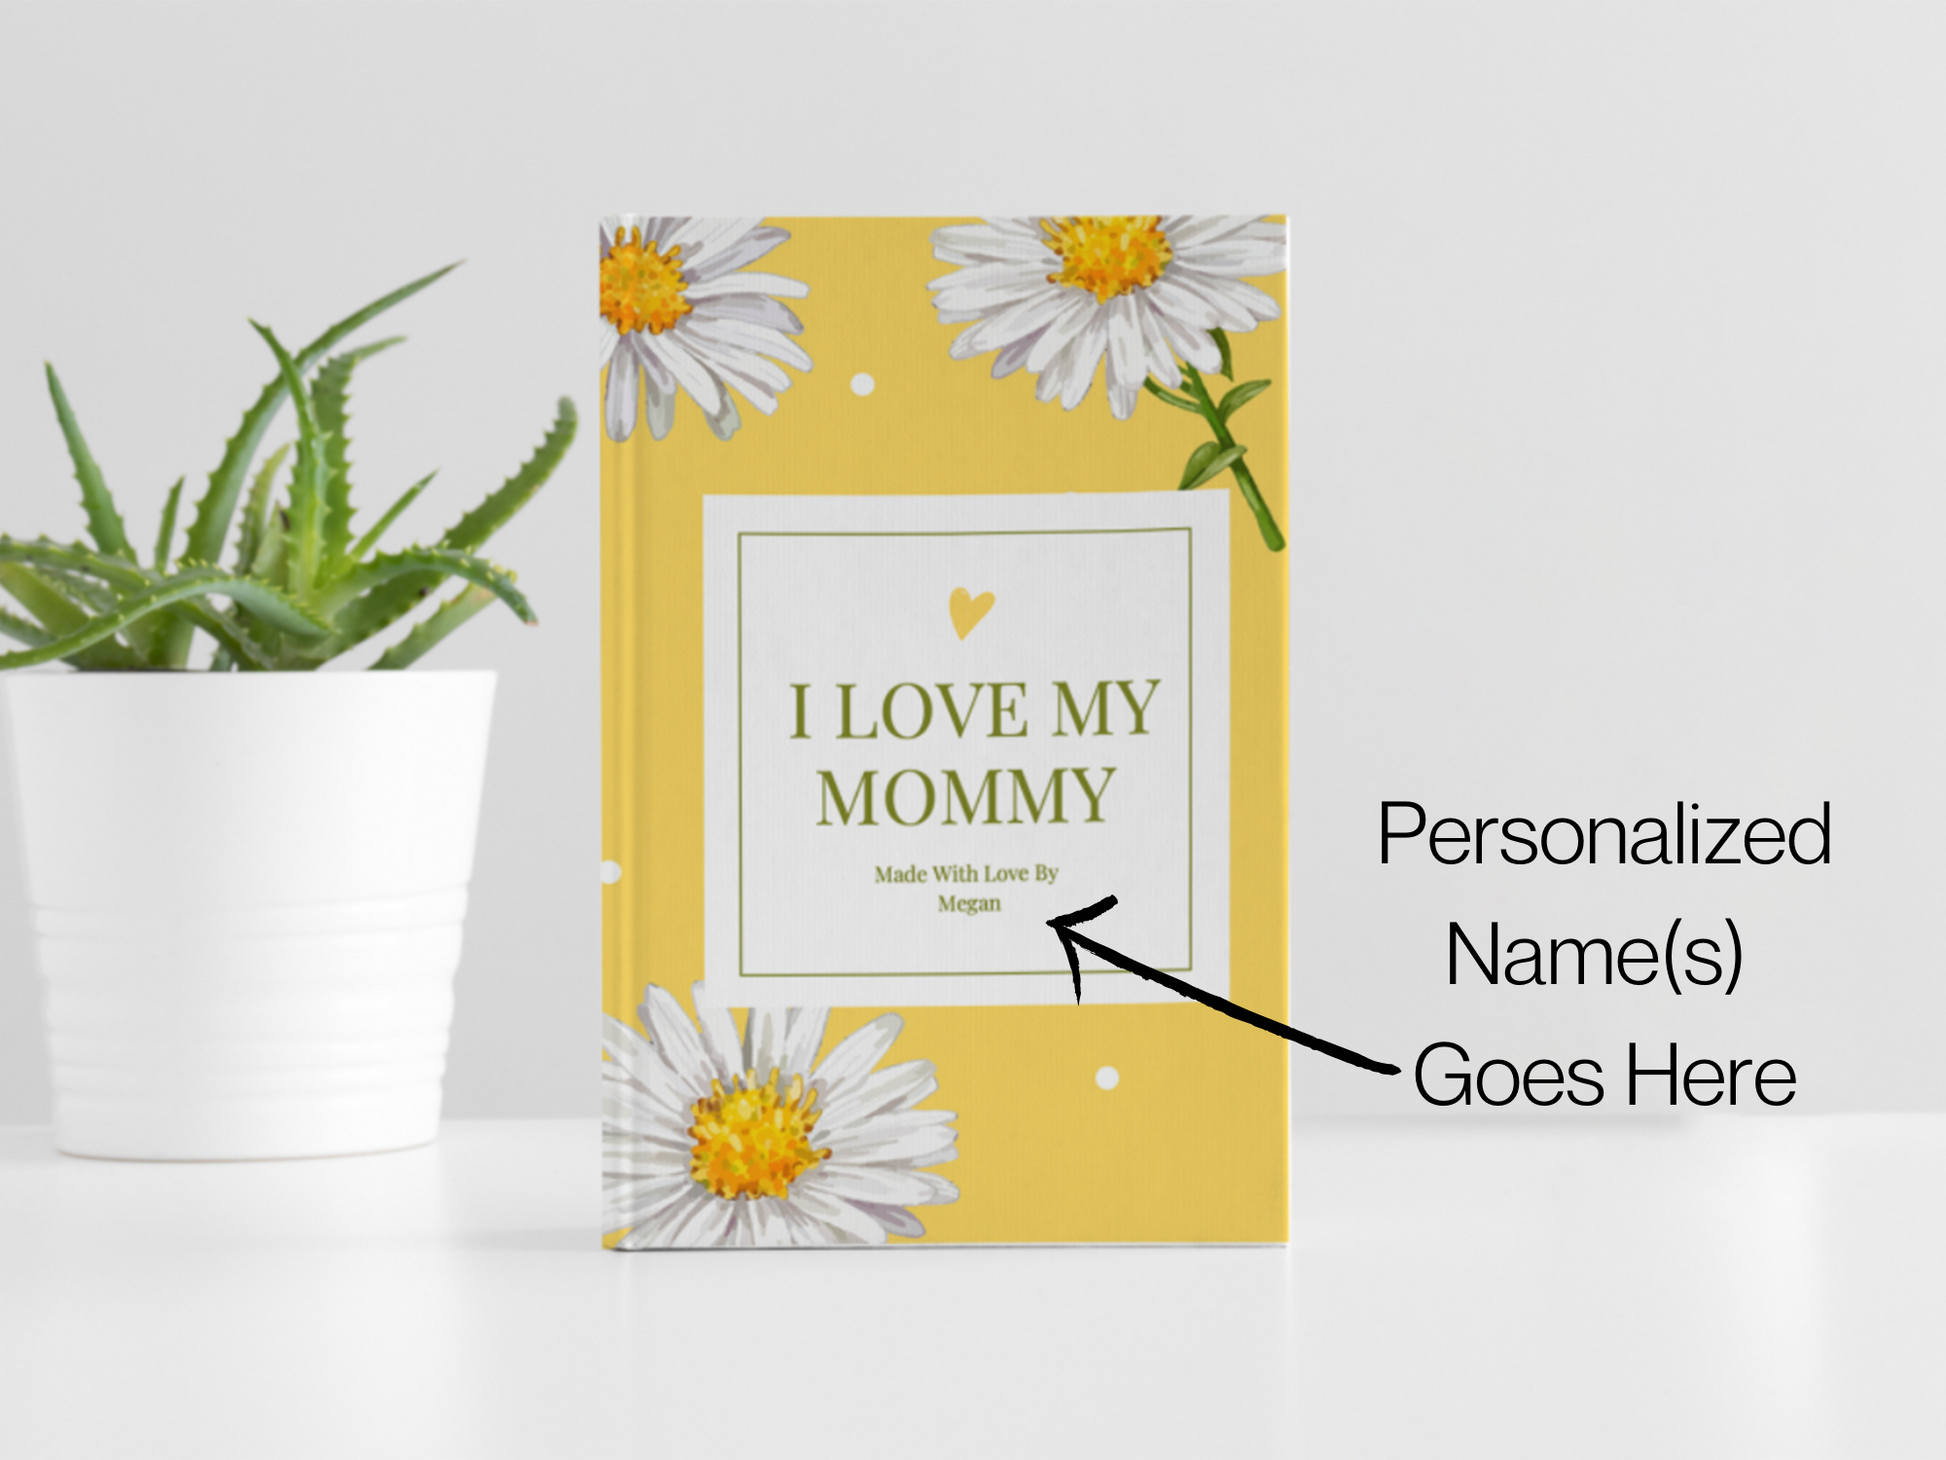 I Love Mommy This Much, Personalized Book for Moms